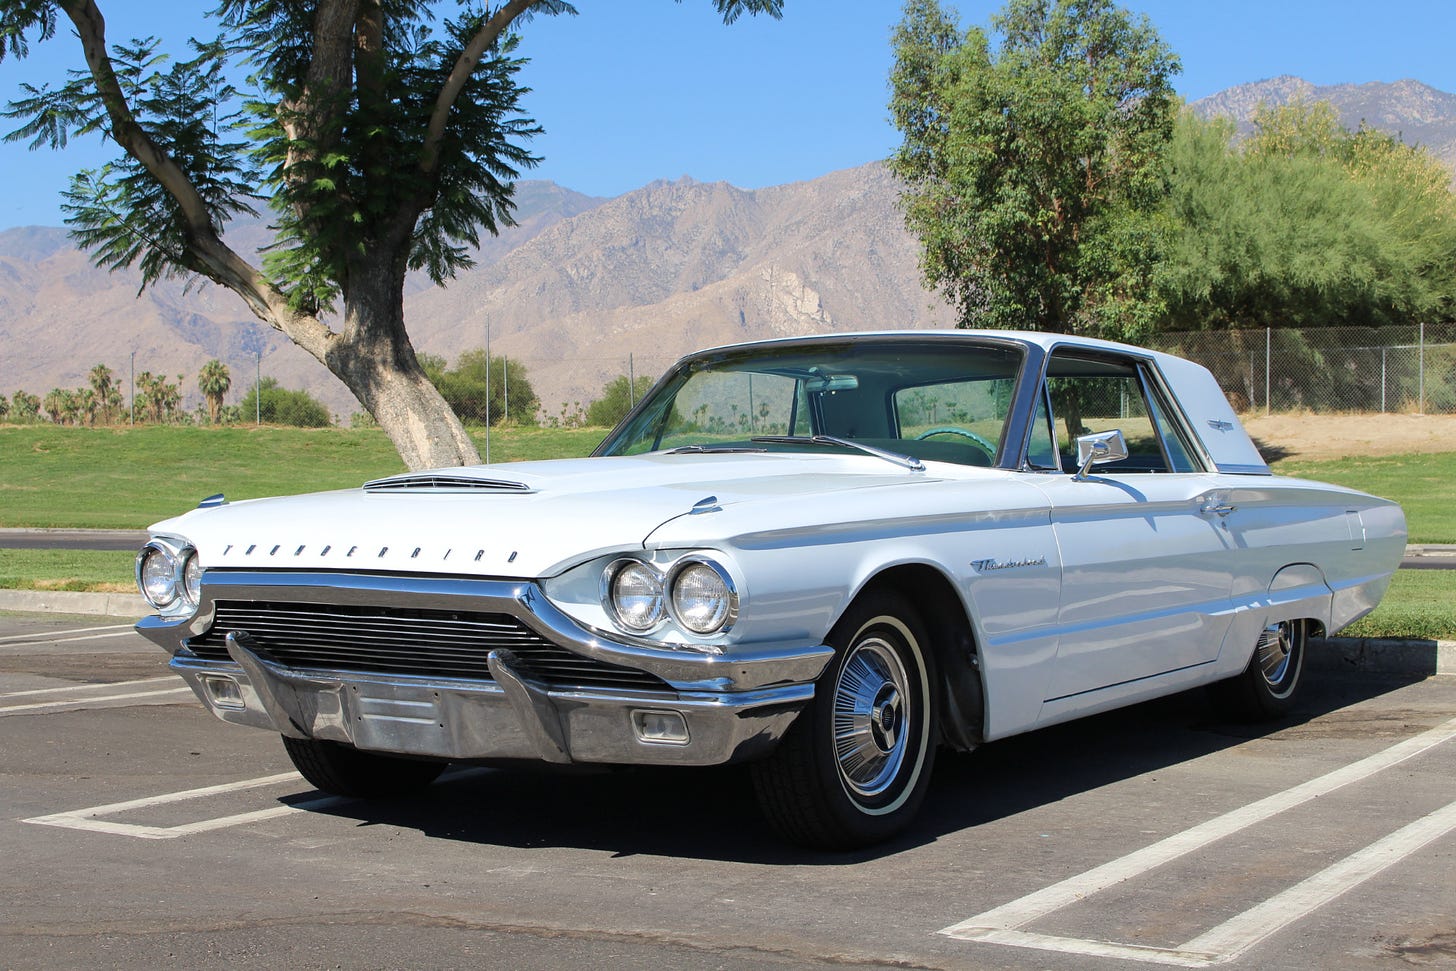 1964 Ford Thunderbird Coupe Stock # F348 for sale near Palm Springs, CA ...